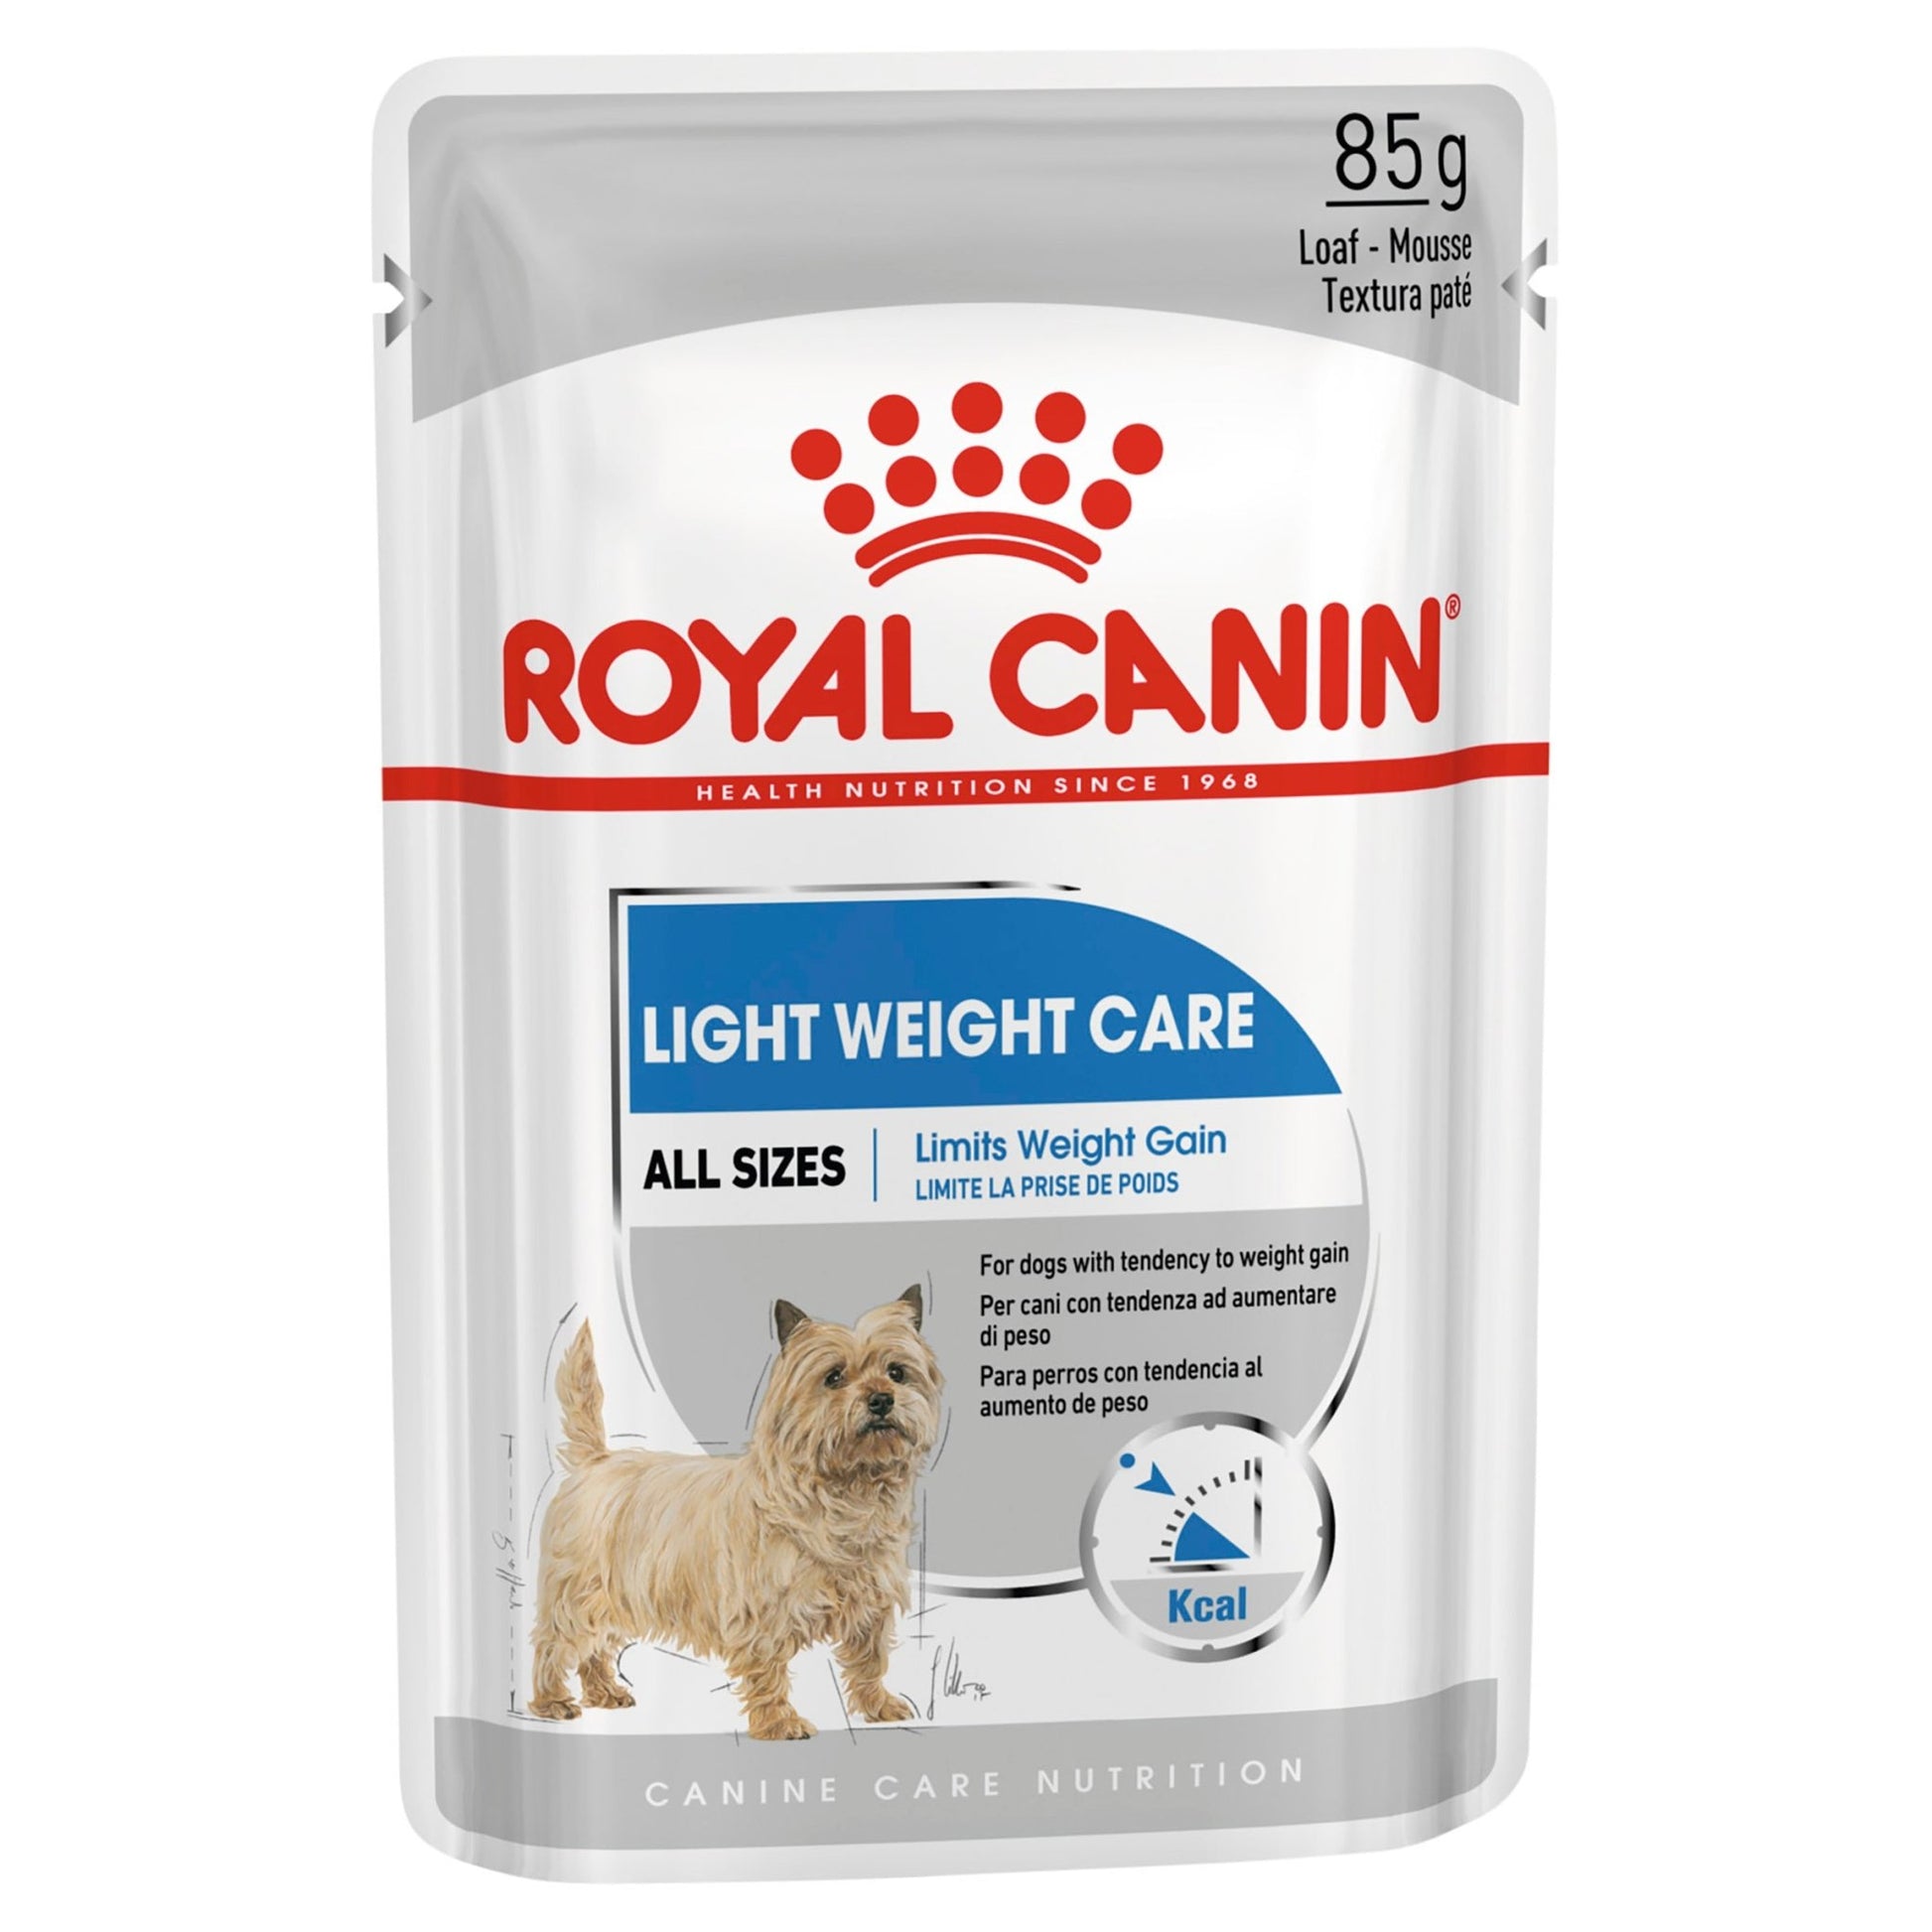 Royal Canin Dog Wet Pouches Light Weight Care Loaf 12x85g - Woonona Petfood & Produce